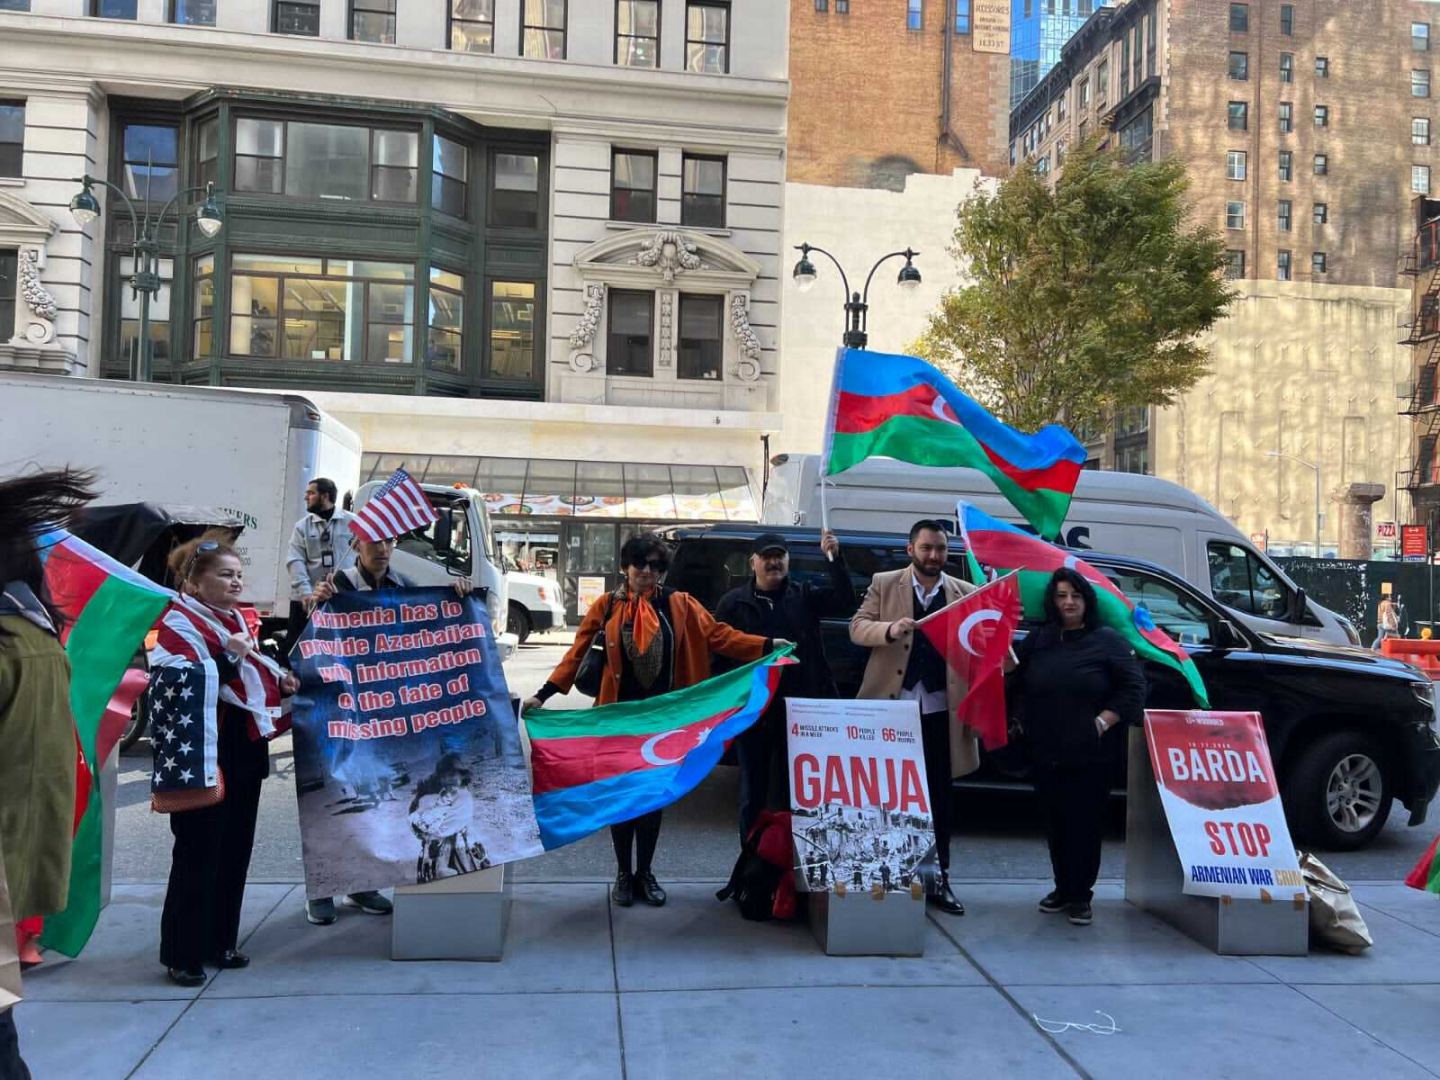 Azerbaijani community activists hold rally in front of headquarters of Human Rights Watch in New York (PHOTO)